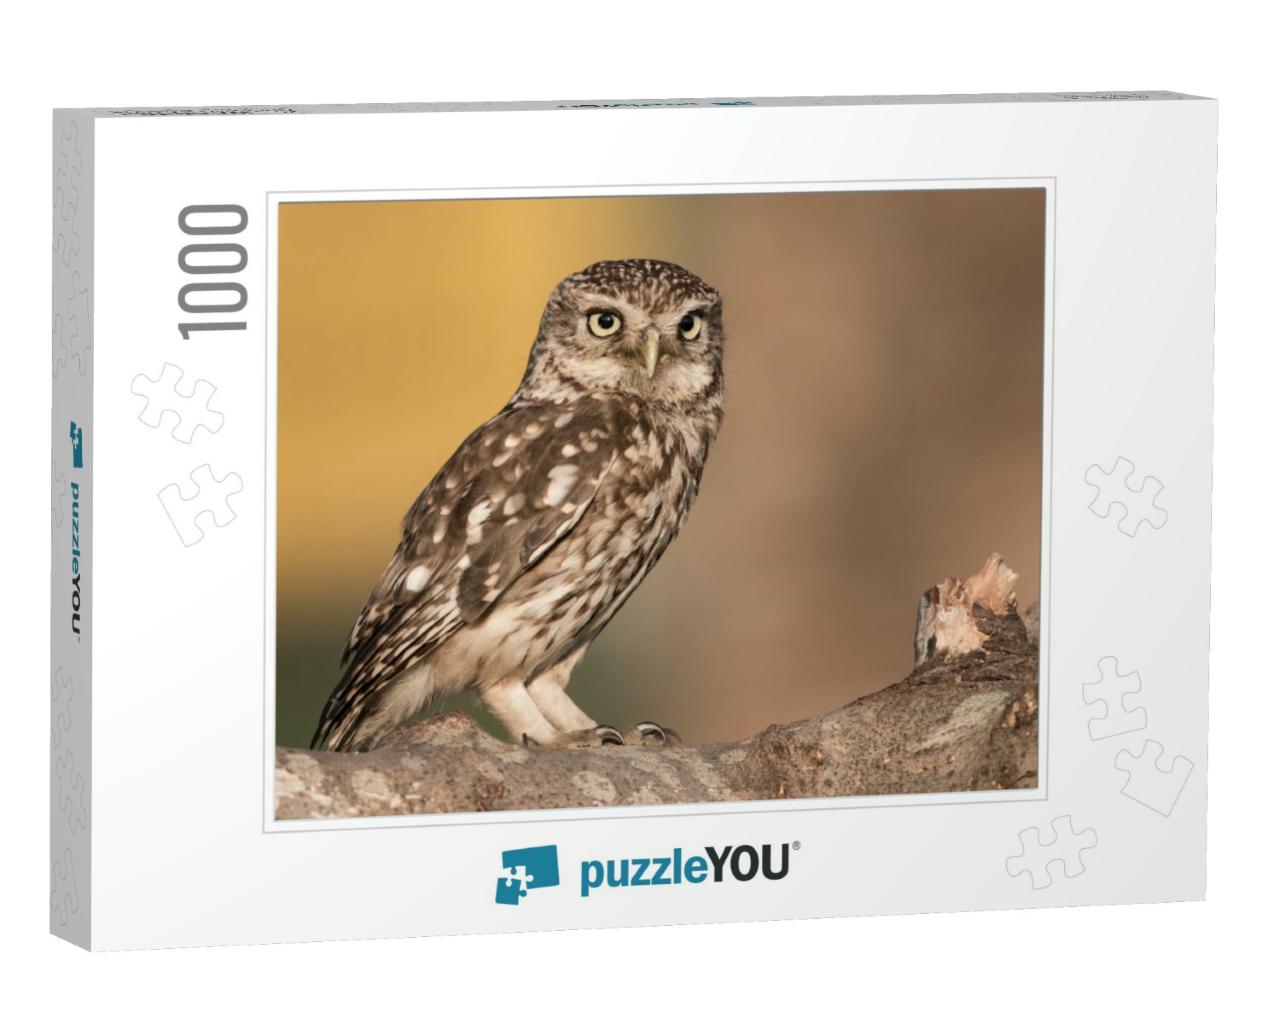 Little Owl Perched on Branch... Jigsaw Puzzle with 1000 pieces